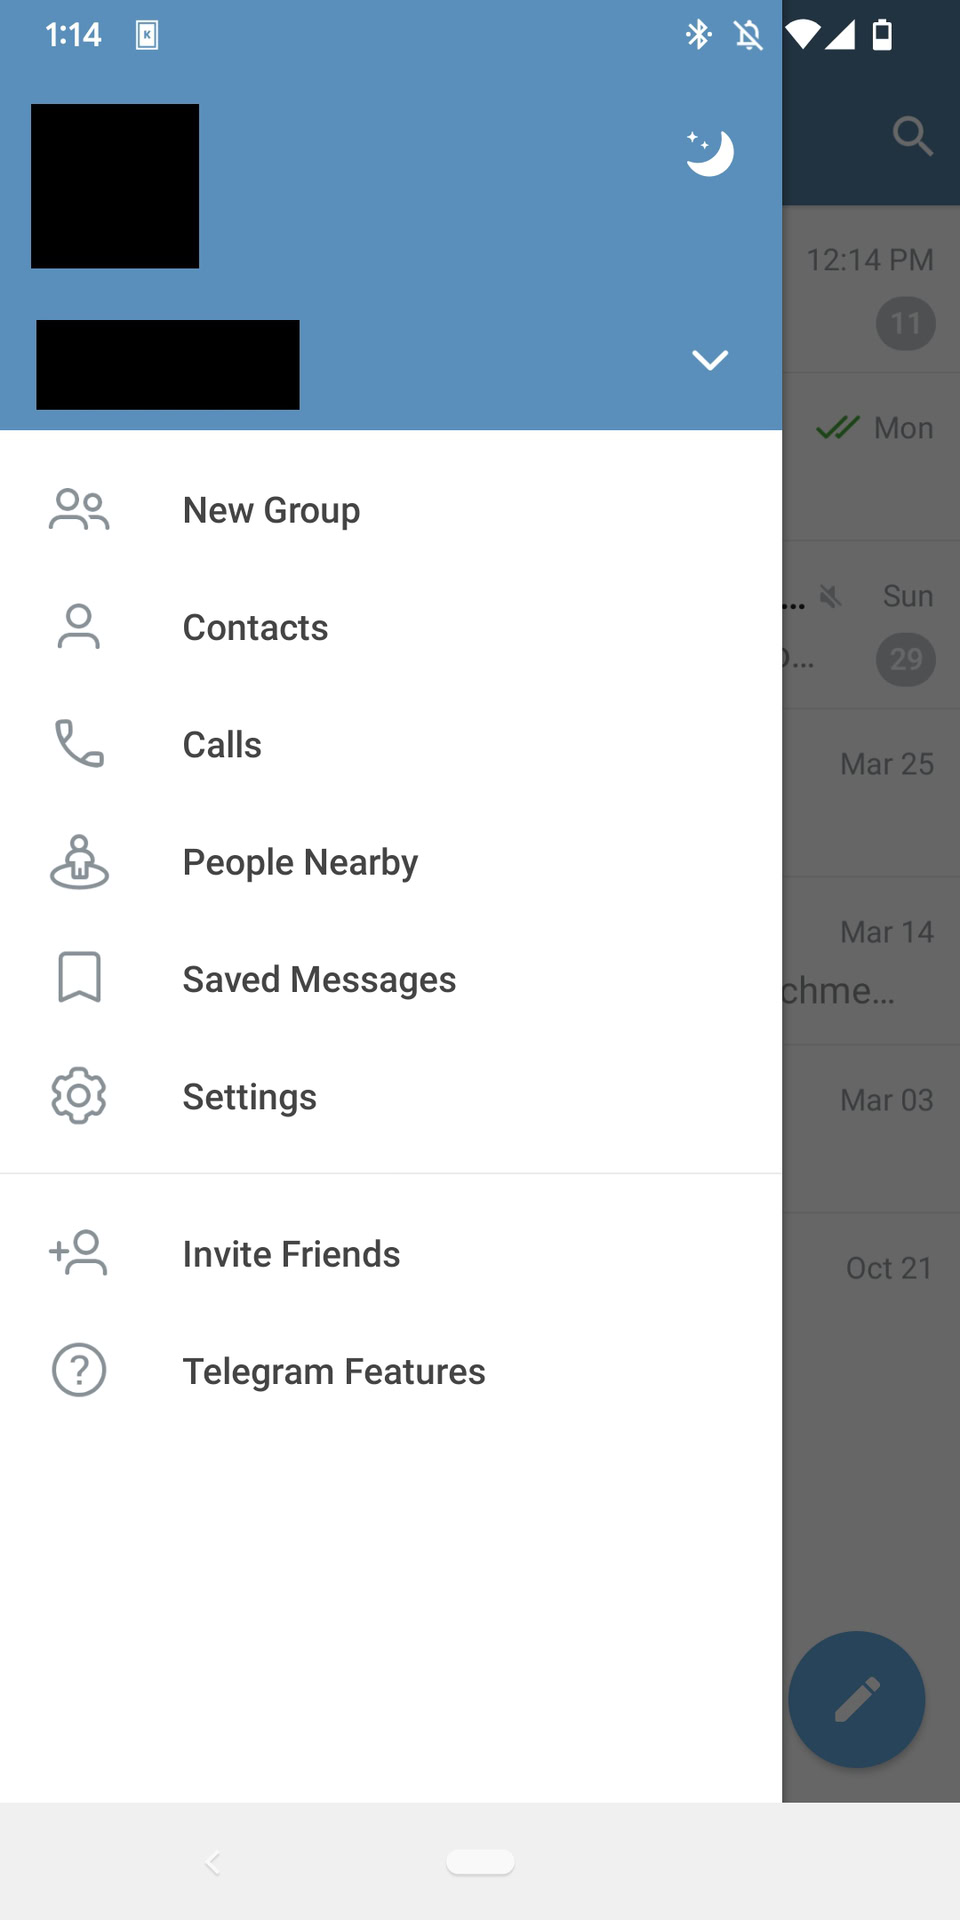 The Telegram settings menu opens within the mobile application.